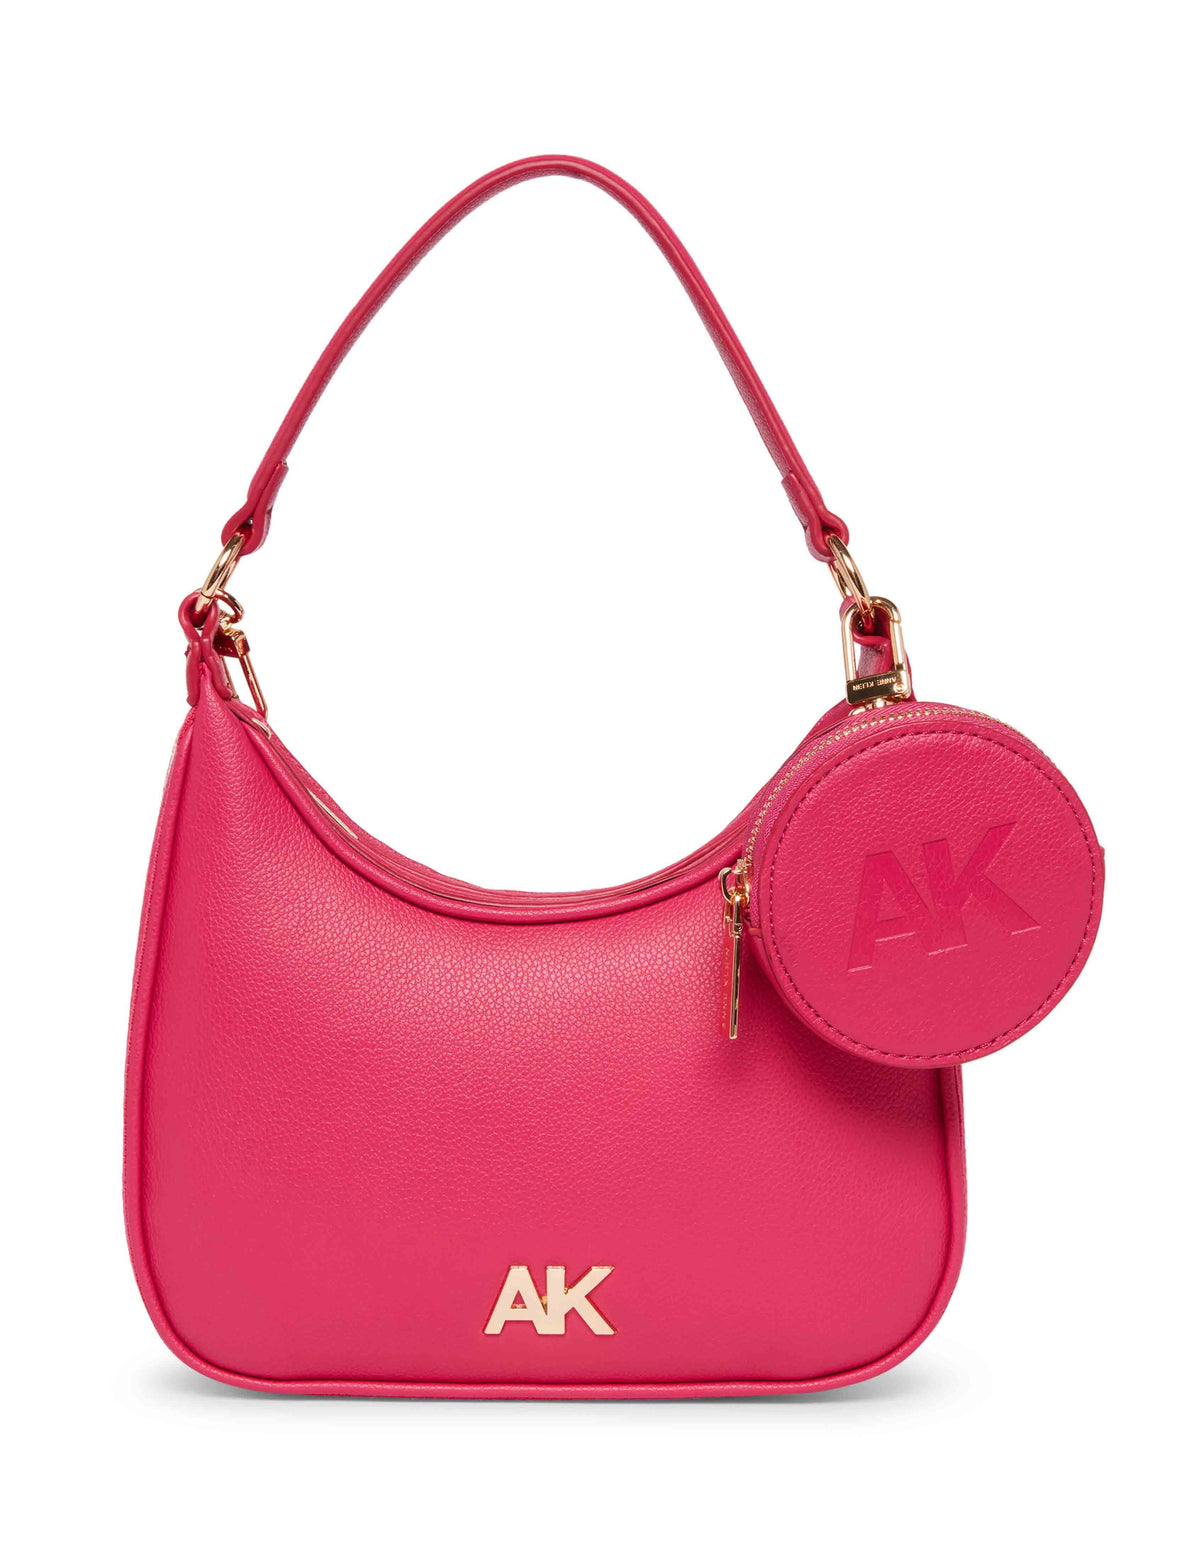 Anne Klein Hibiscus Pink/Hibiscus-Gold Convertible Shoulder Bag With Web Strap